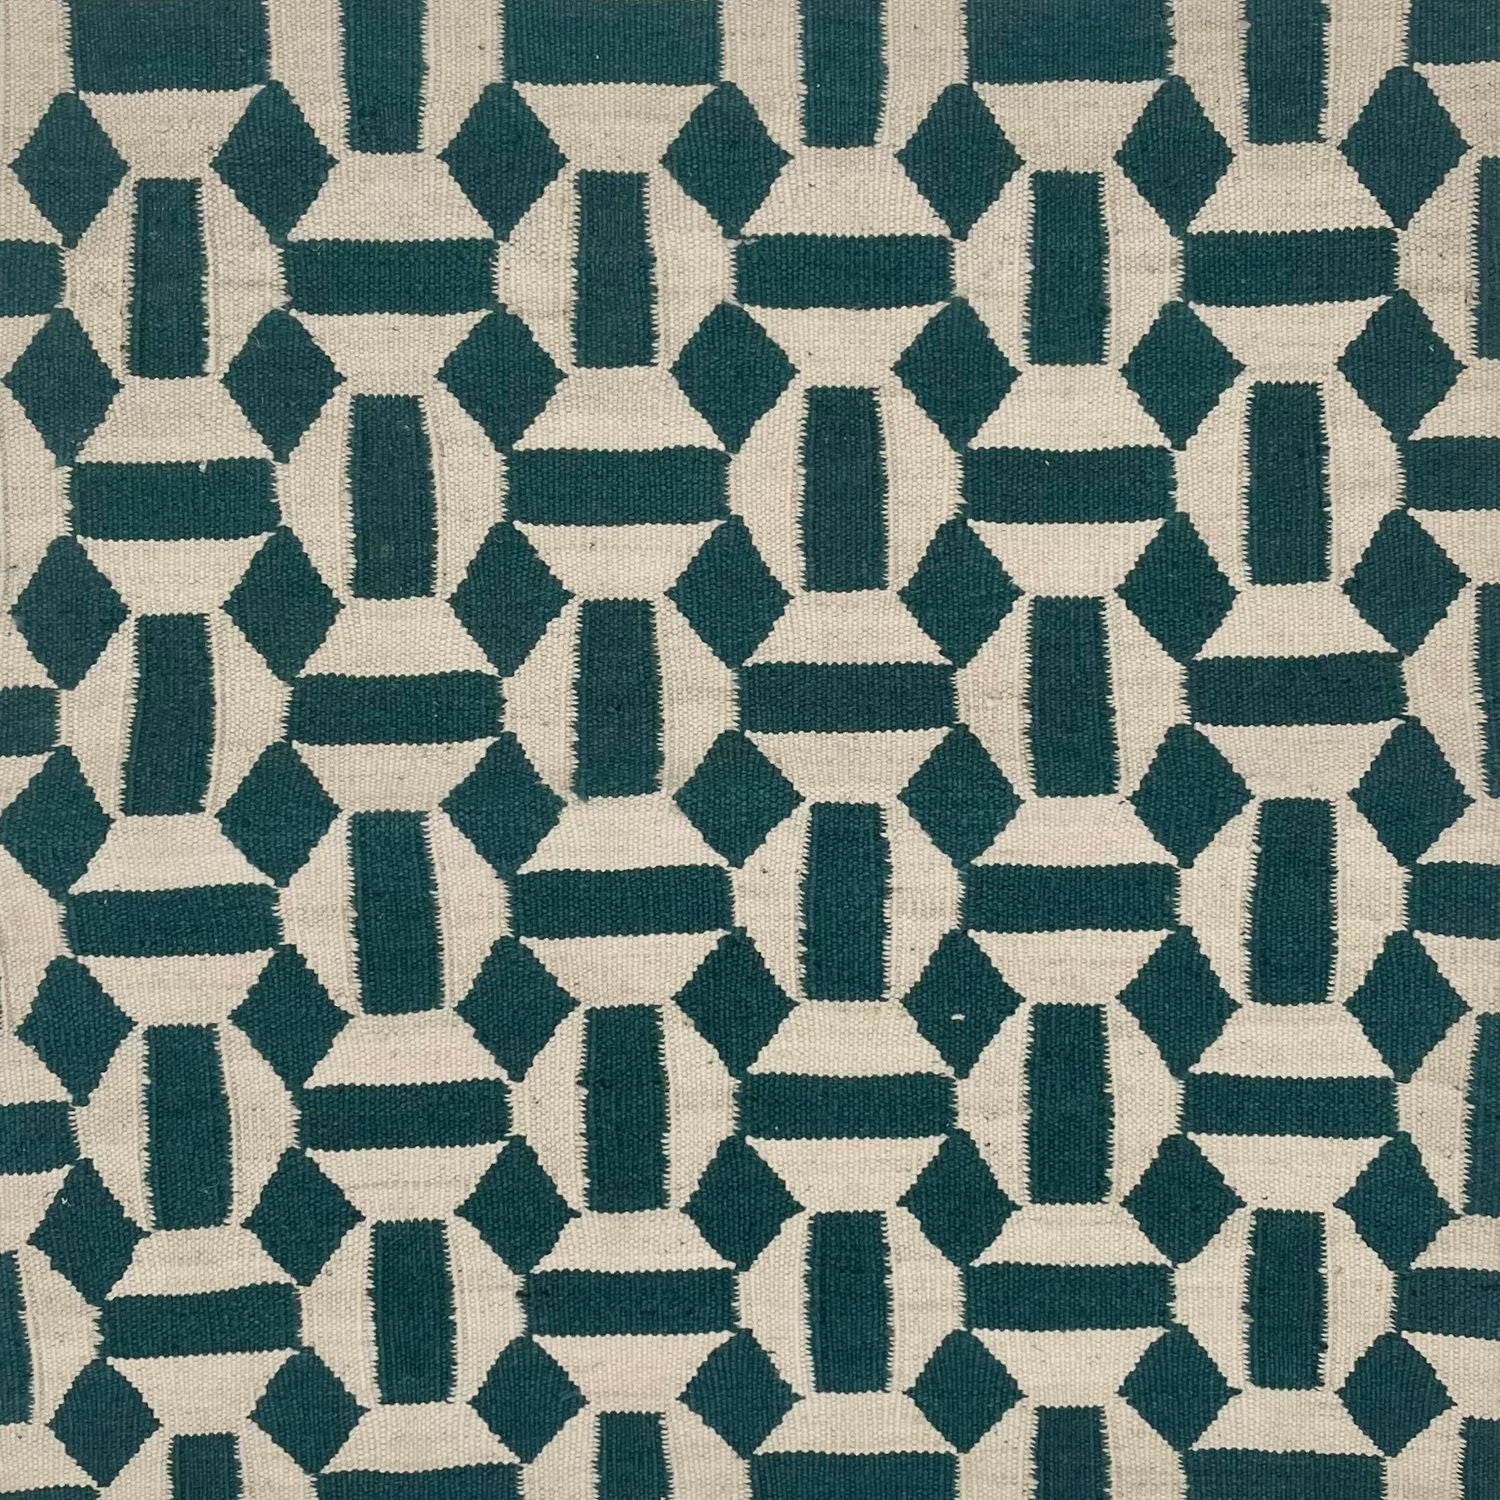 An ivory and deep turquoise rug with a repeating mosaic geometric pattern.